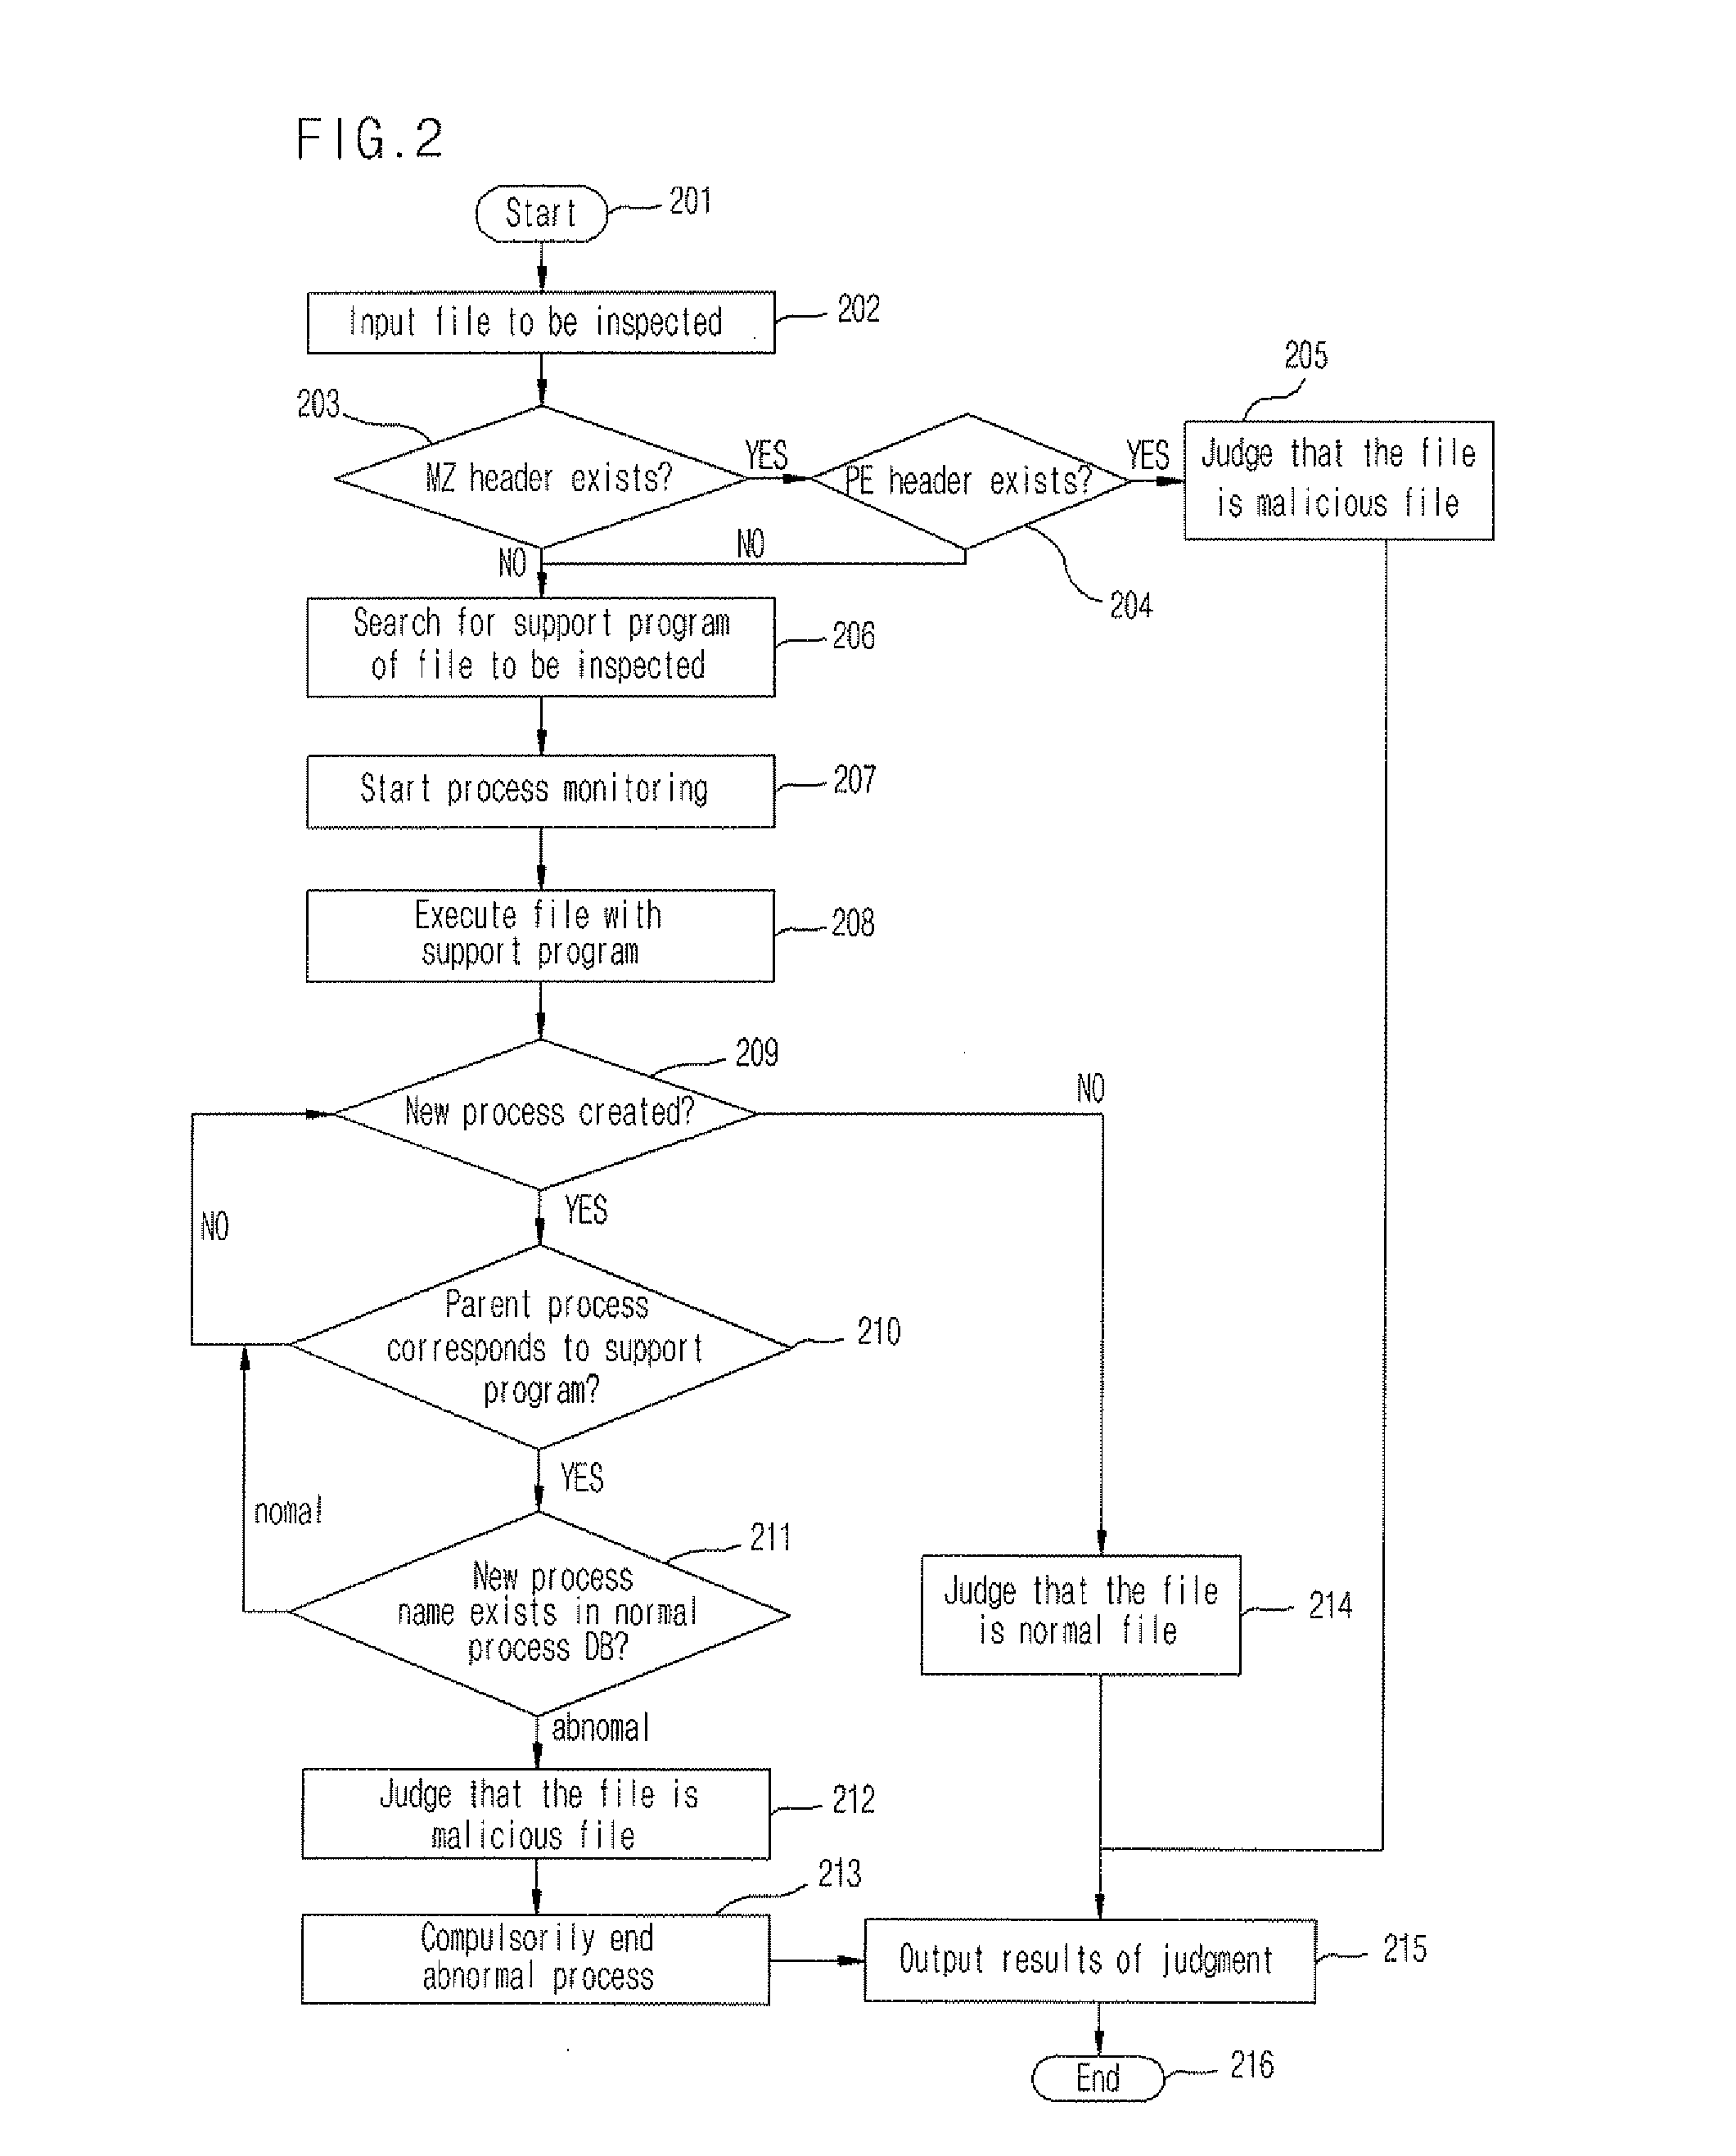 Apparatus and method of detecting file having embedded malicious code